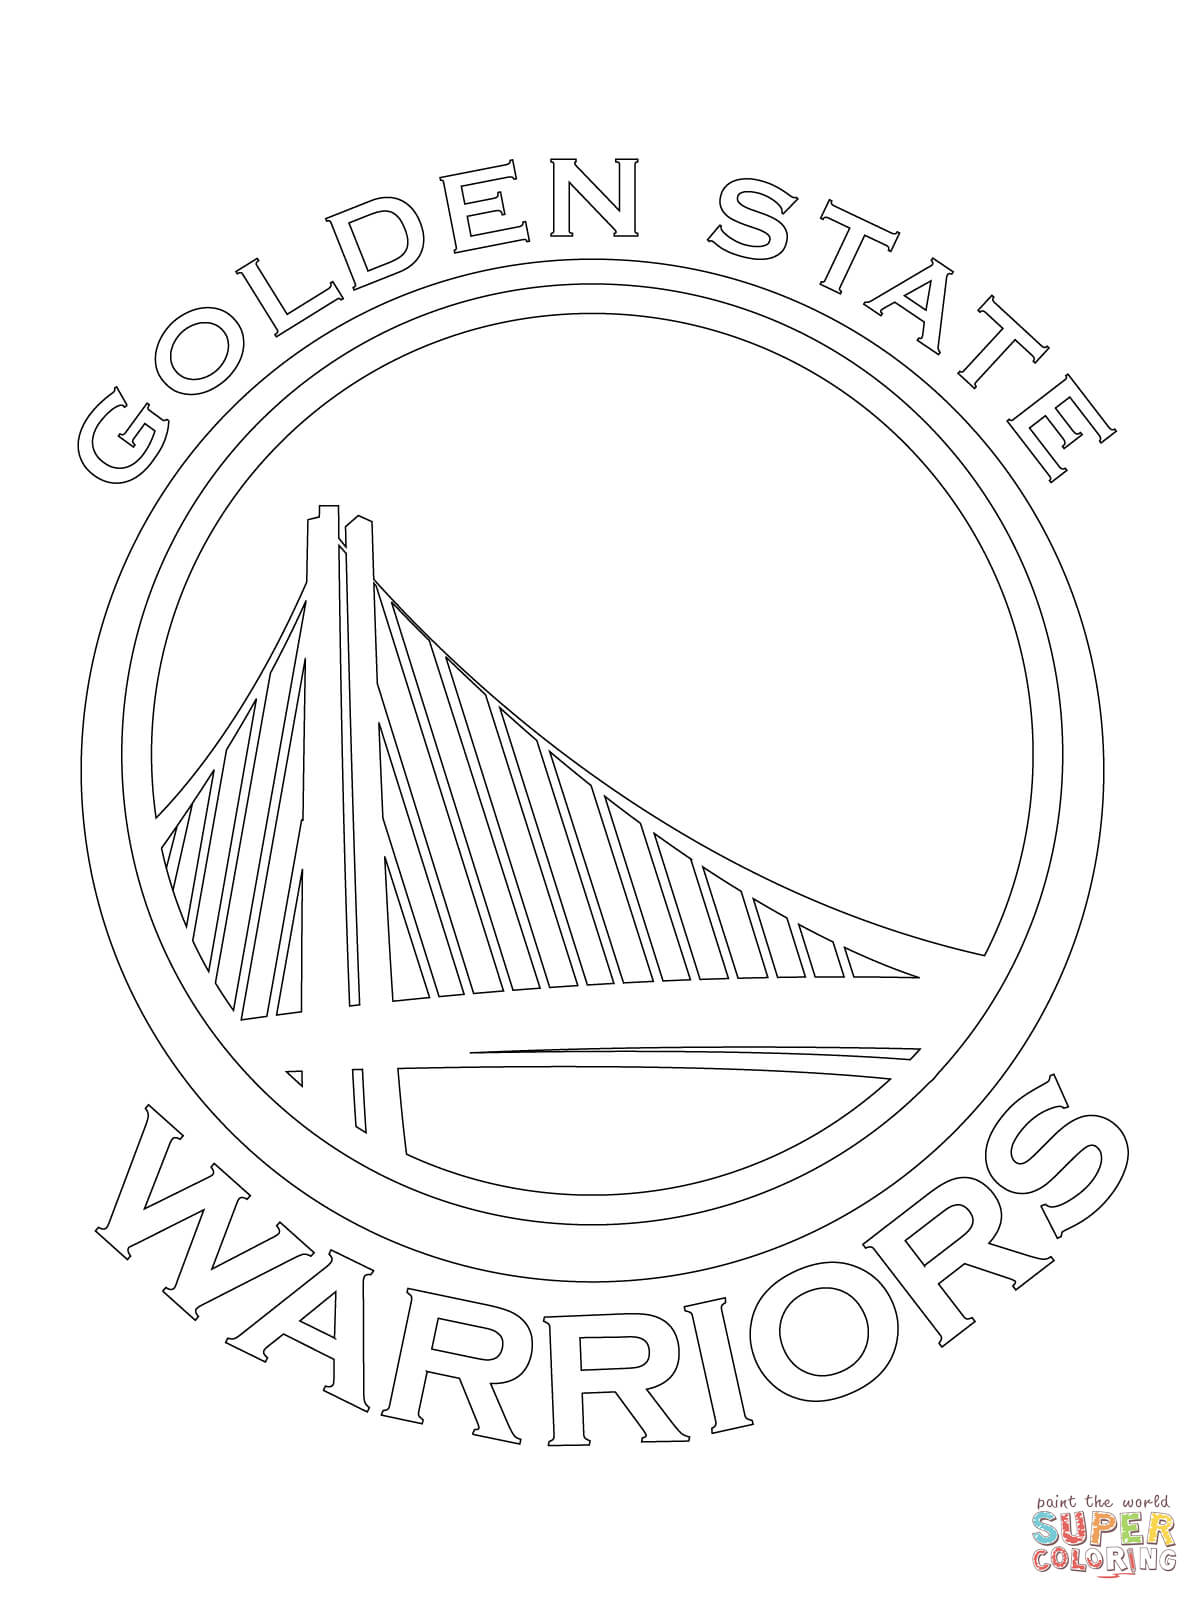 Golden state warriors logo coloring page free printable coloring pages